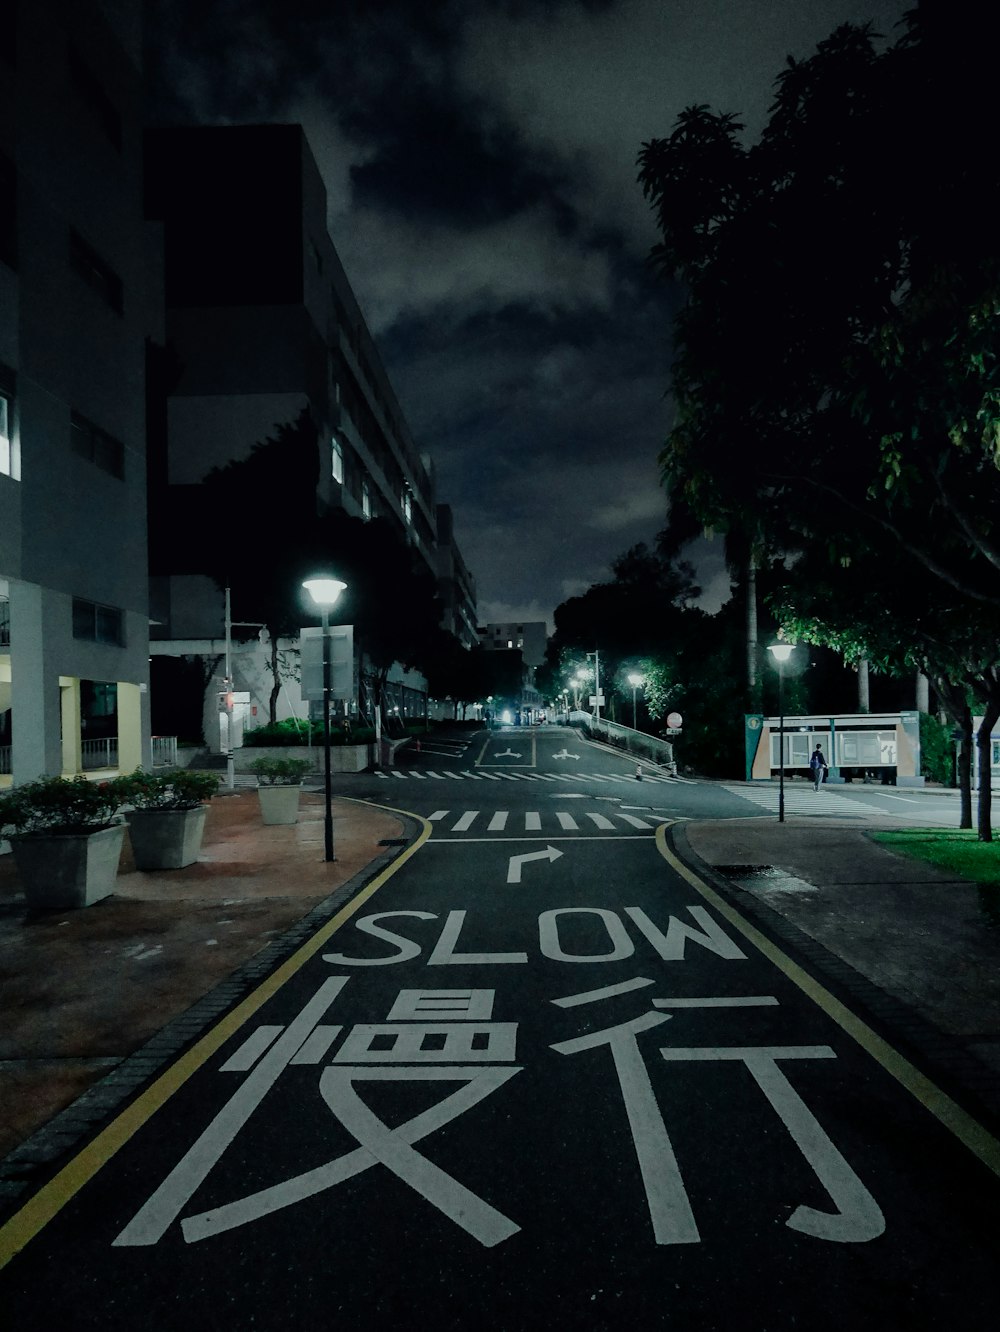 a street at night with a sign painted on the road